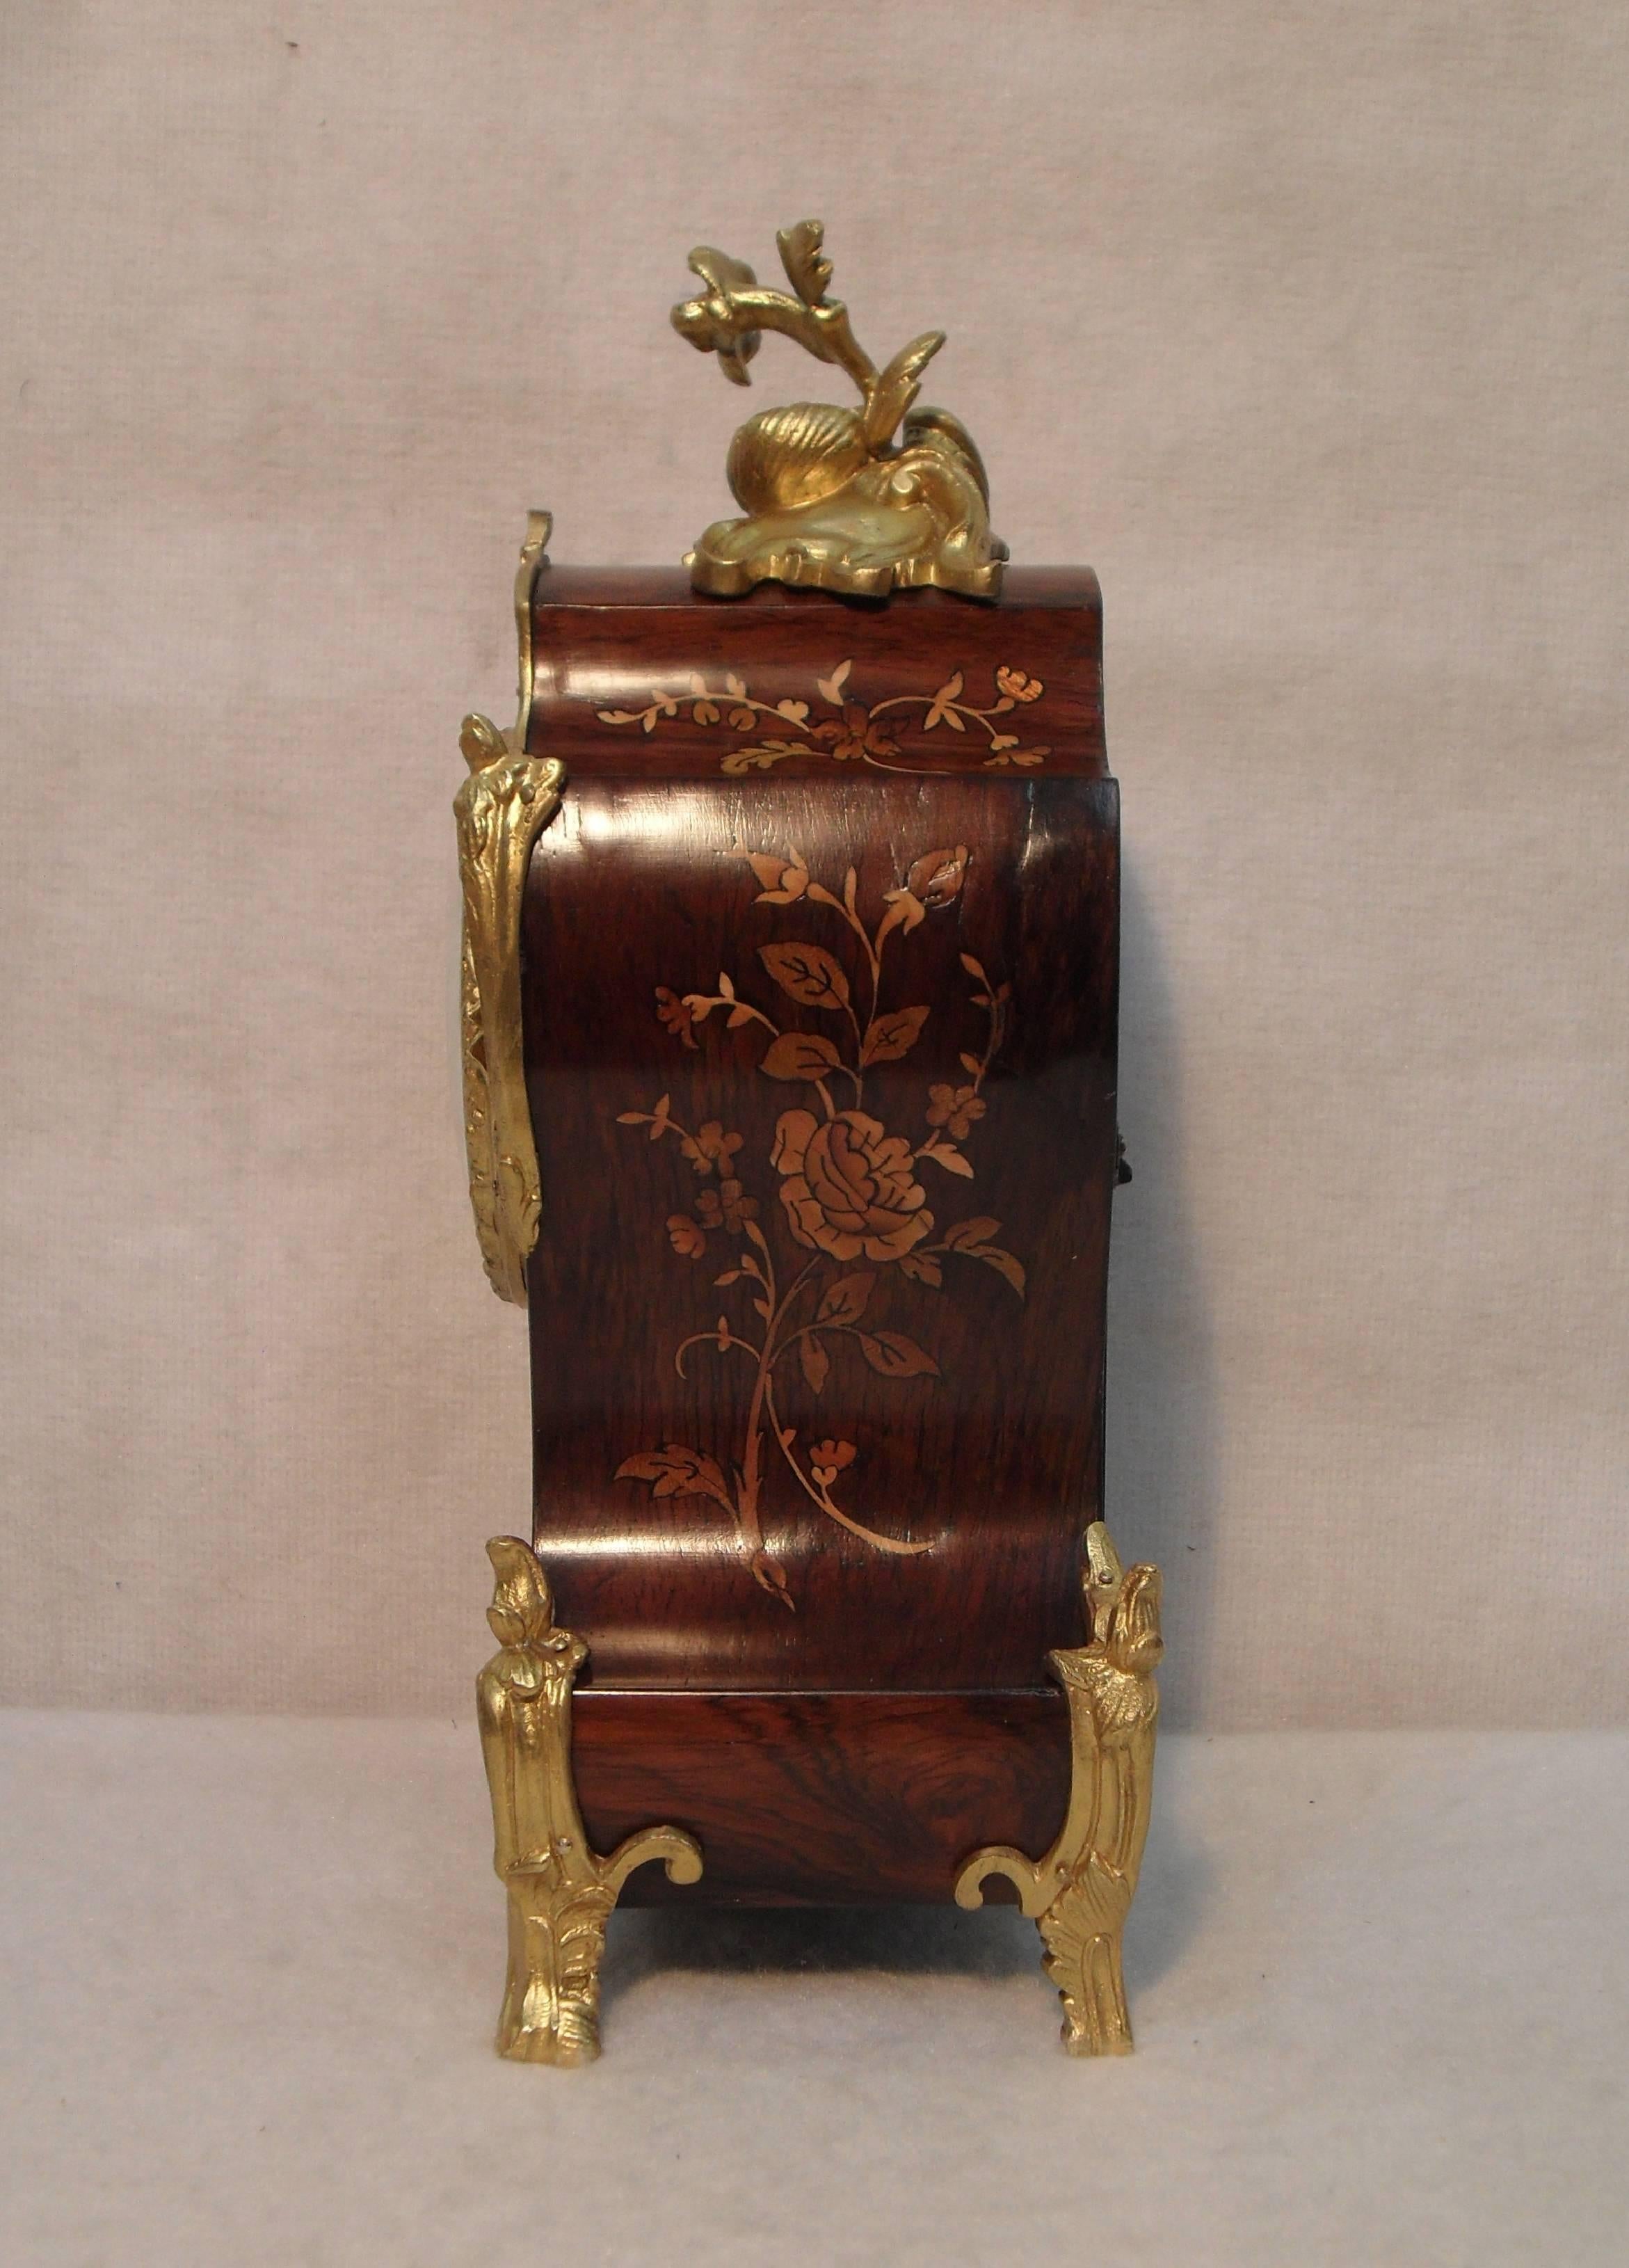 19th Century French Louis XV Style Floral Marquetry Inlaid Mantel Clock